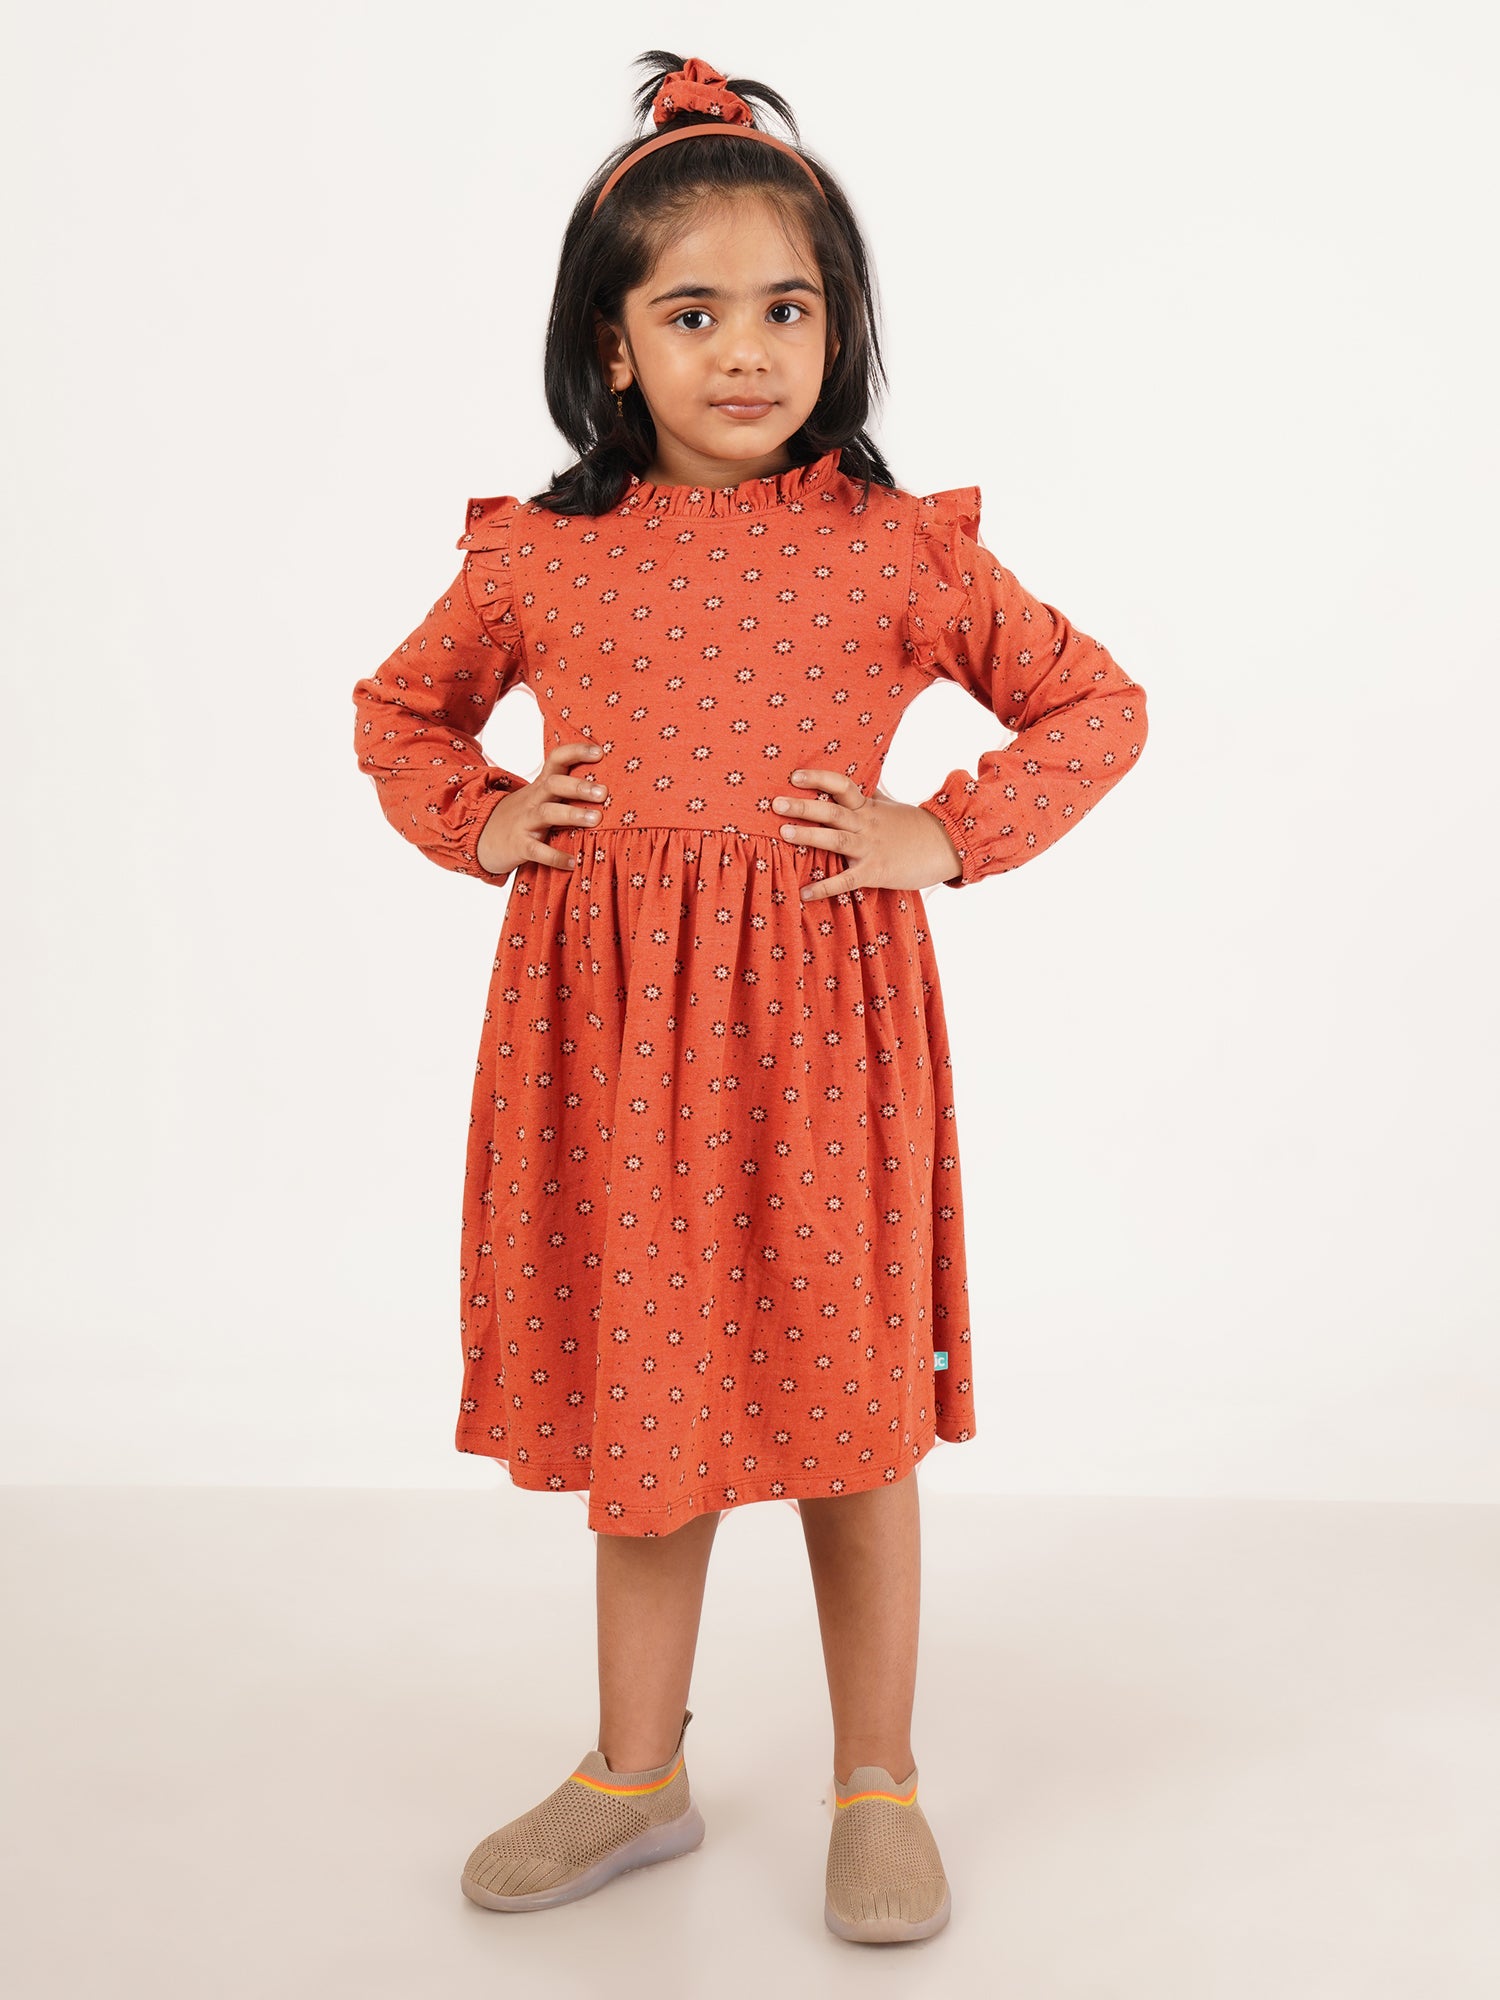 Young Girls All Over Printed Knee Length Fit & Flare Dress